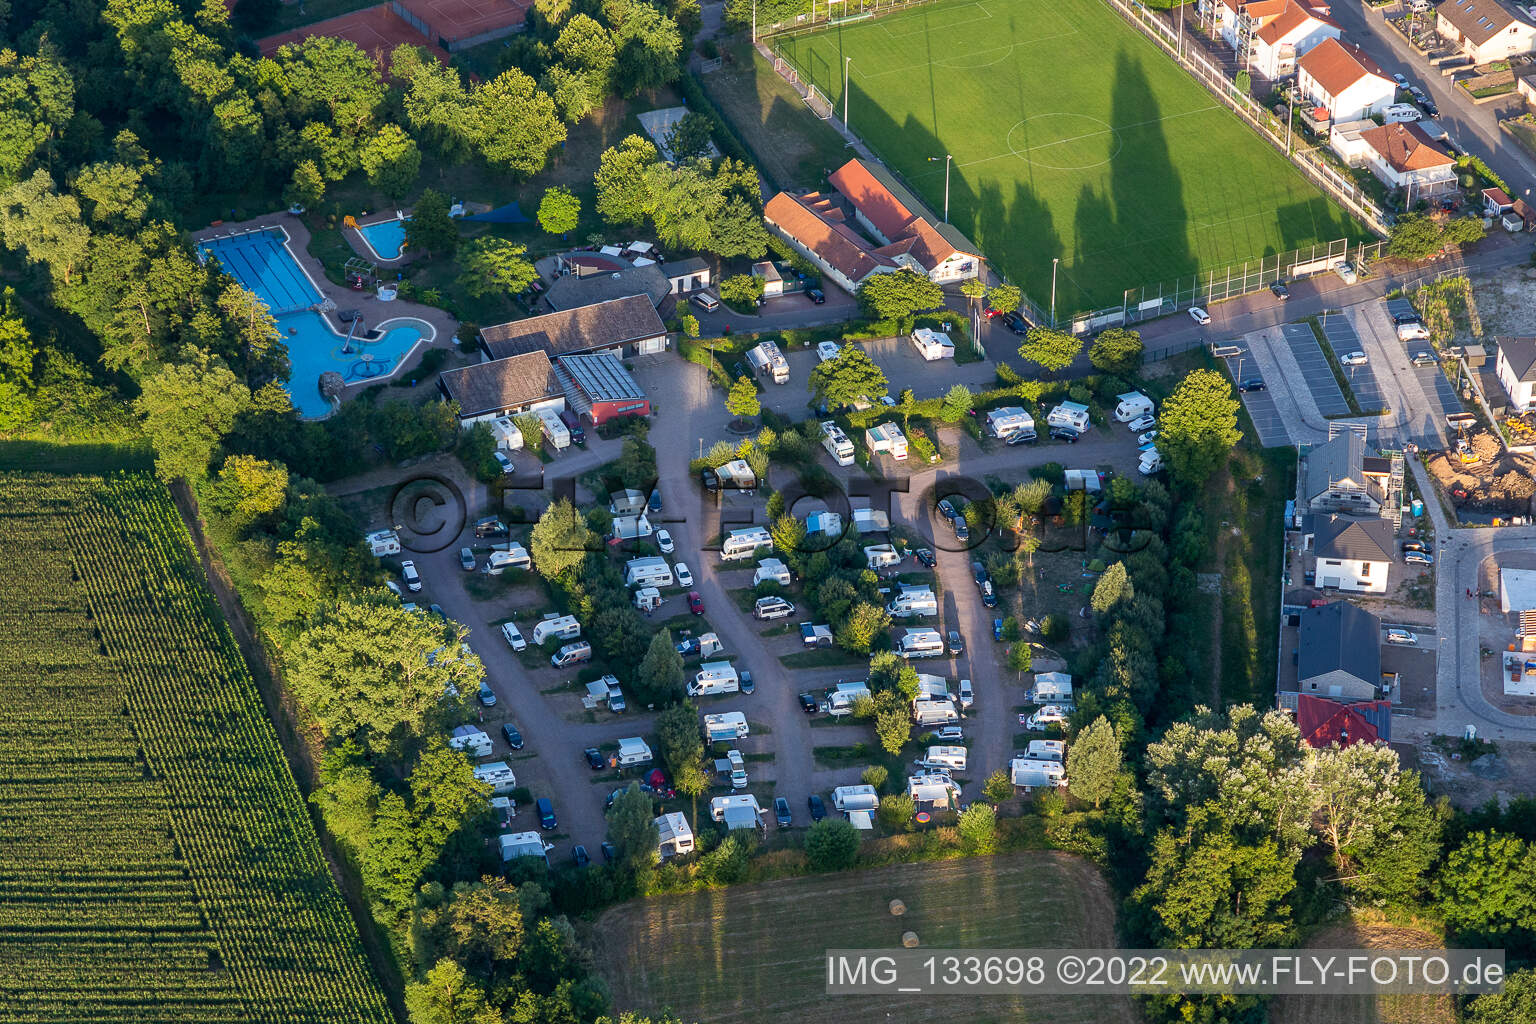 Aerial view of Camping in the Klingbachtal in the district Ingenheim in Billigheim-Ingenheim in the state Rhineland-Palatinate, Germany